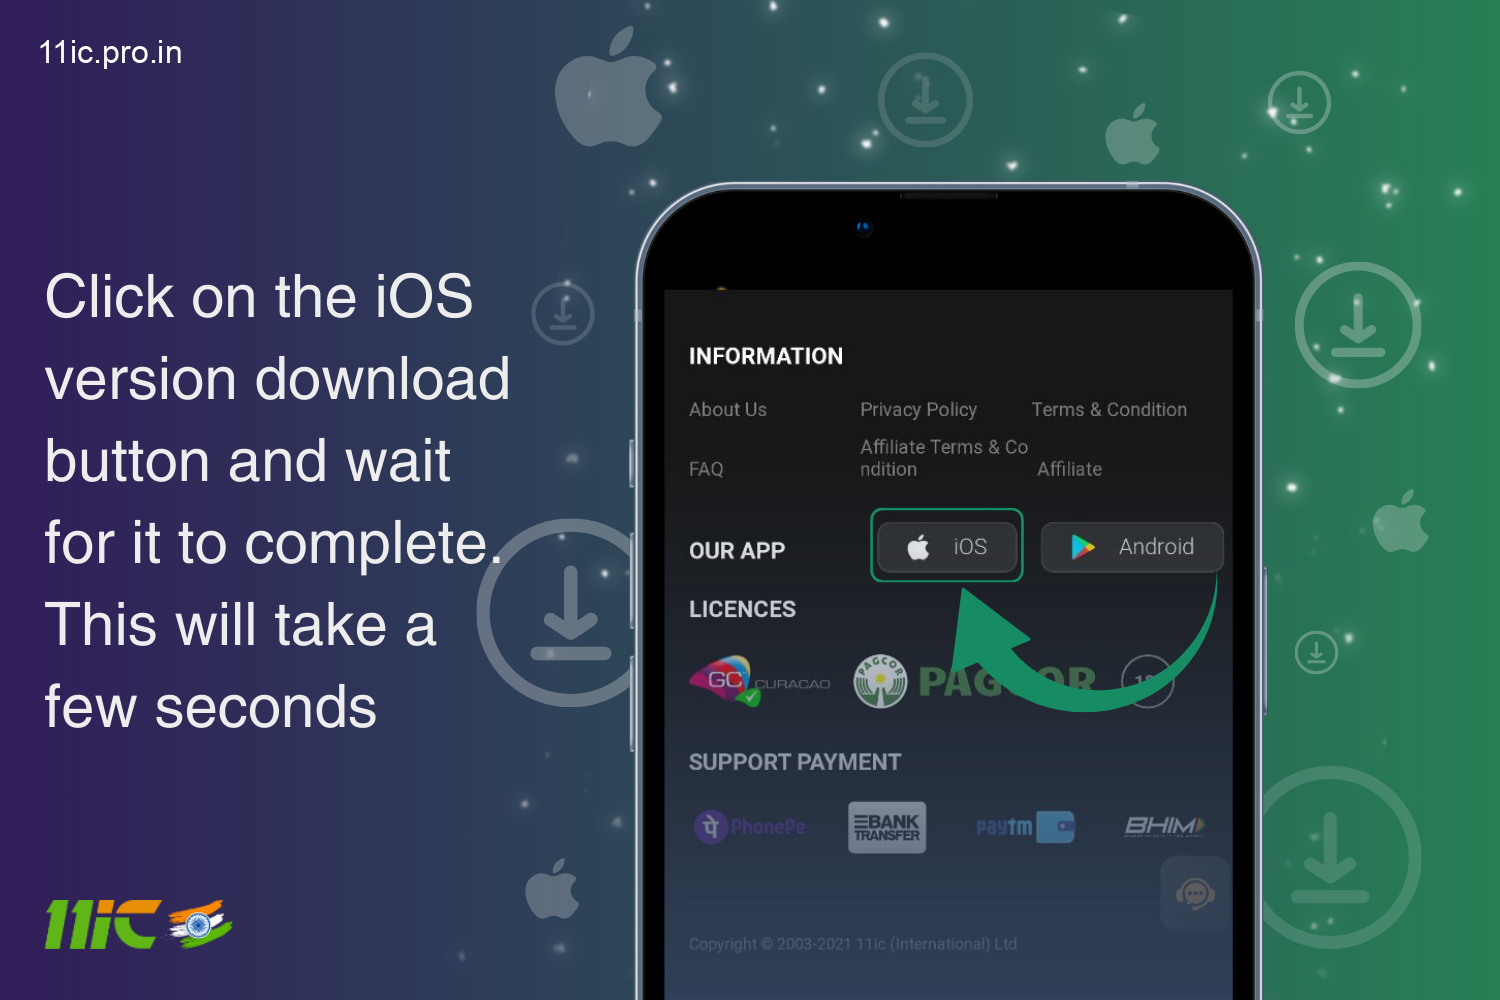 To start downloading the 11ic app for iOS click on the iOS icon